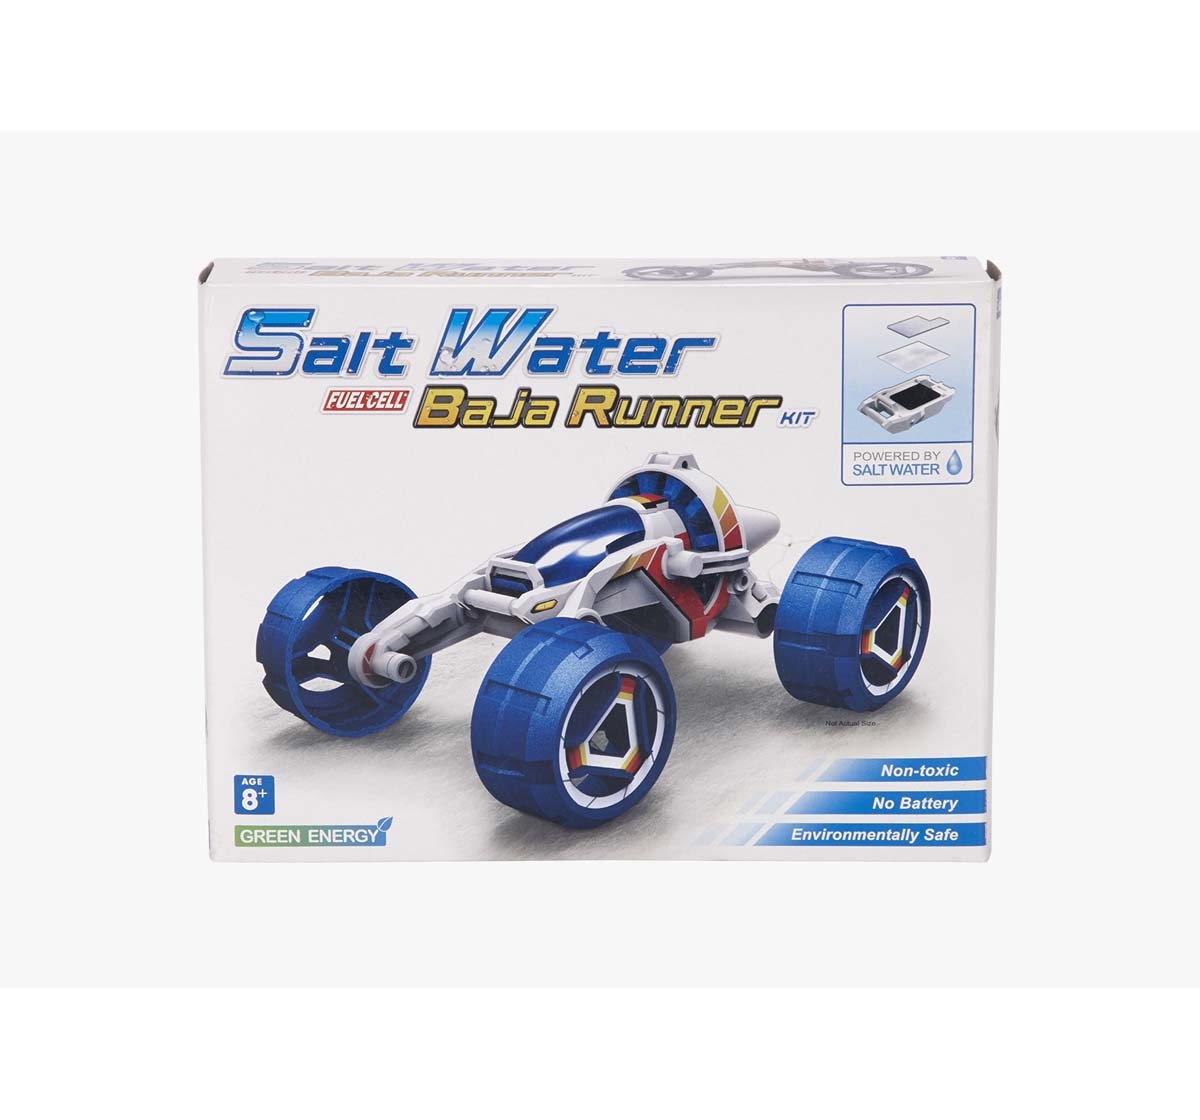 Red 5 | Red5 Blue Salt Water Fuel Cell Baja Runner Science Kits for Kids age 8Y+ 0